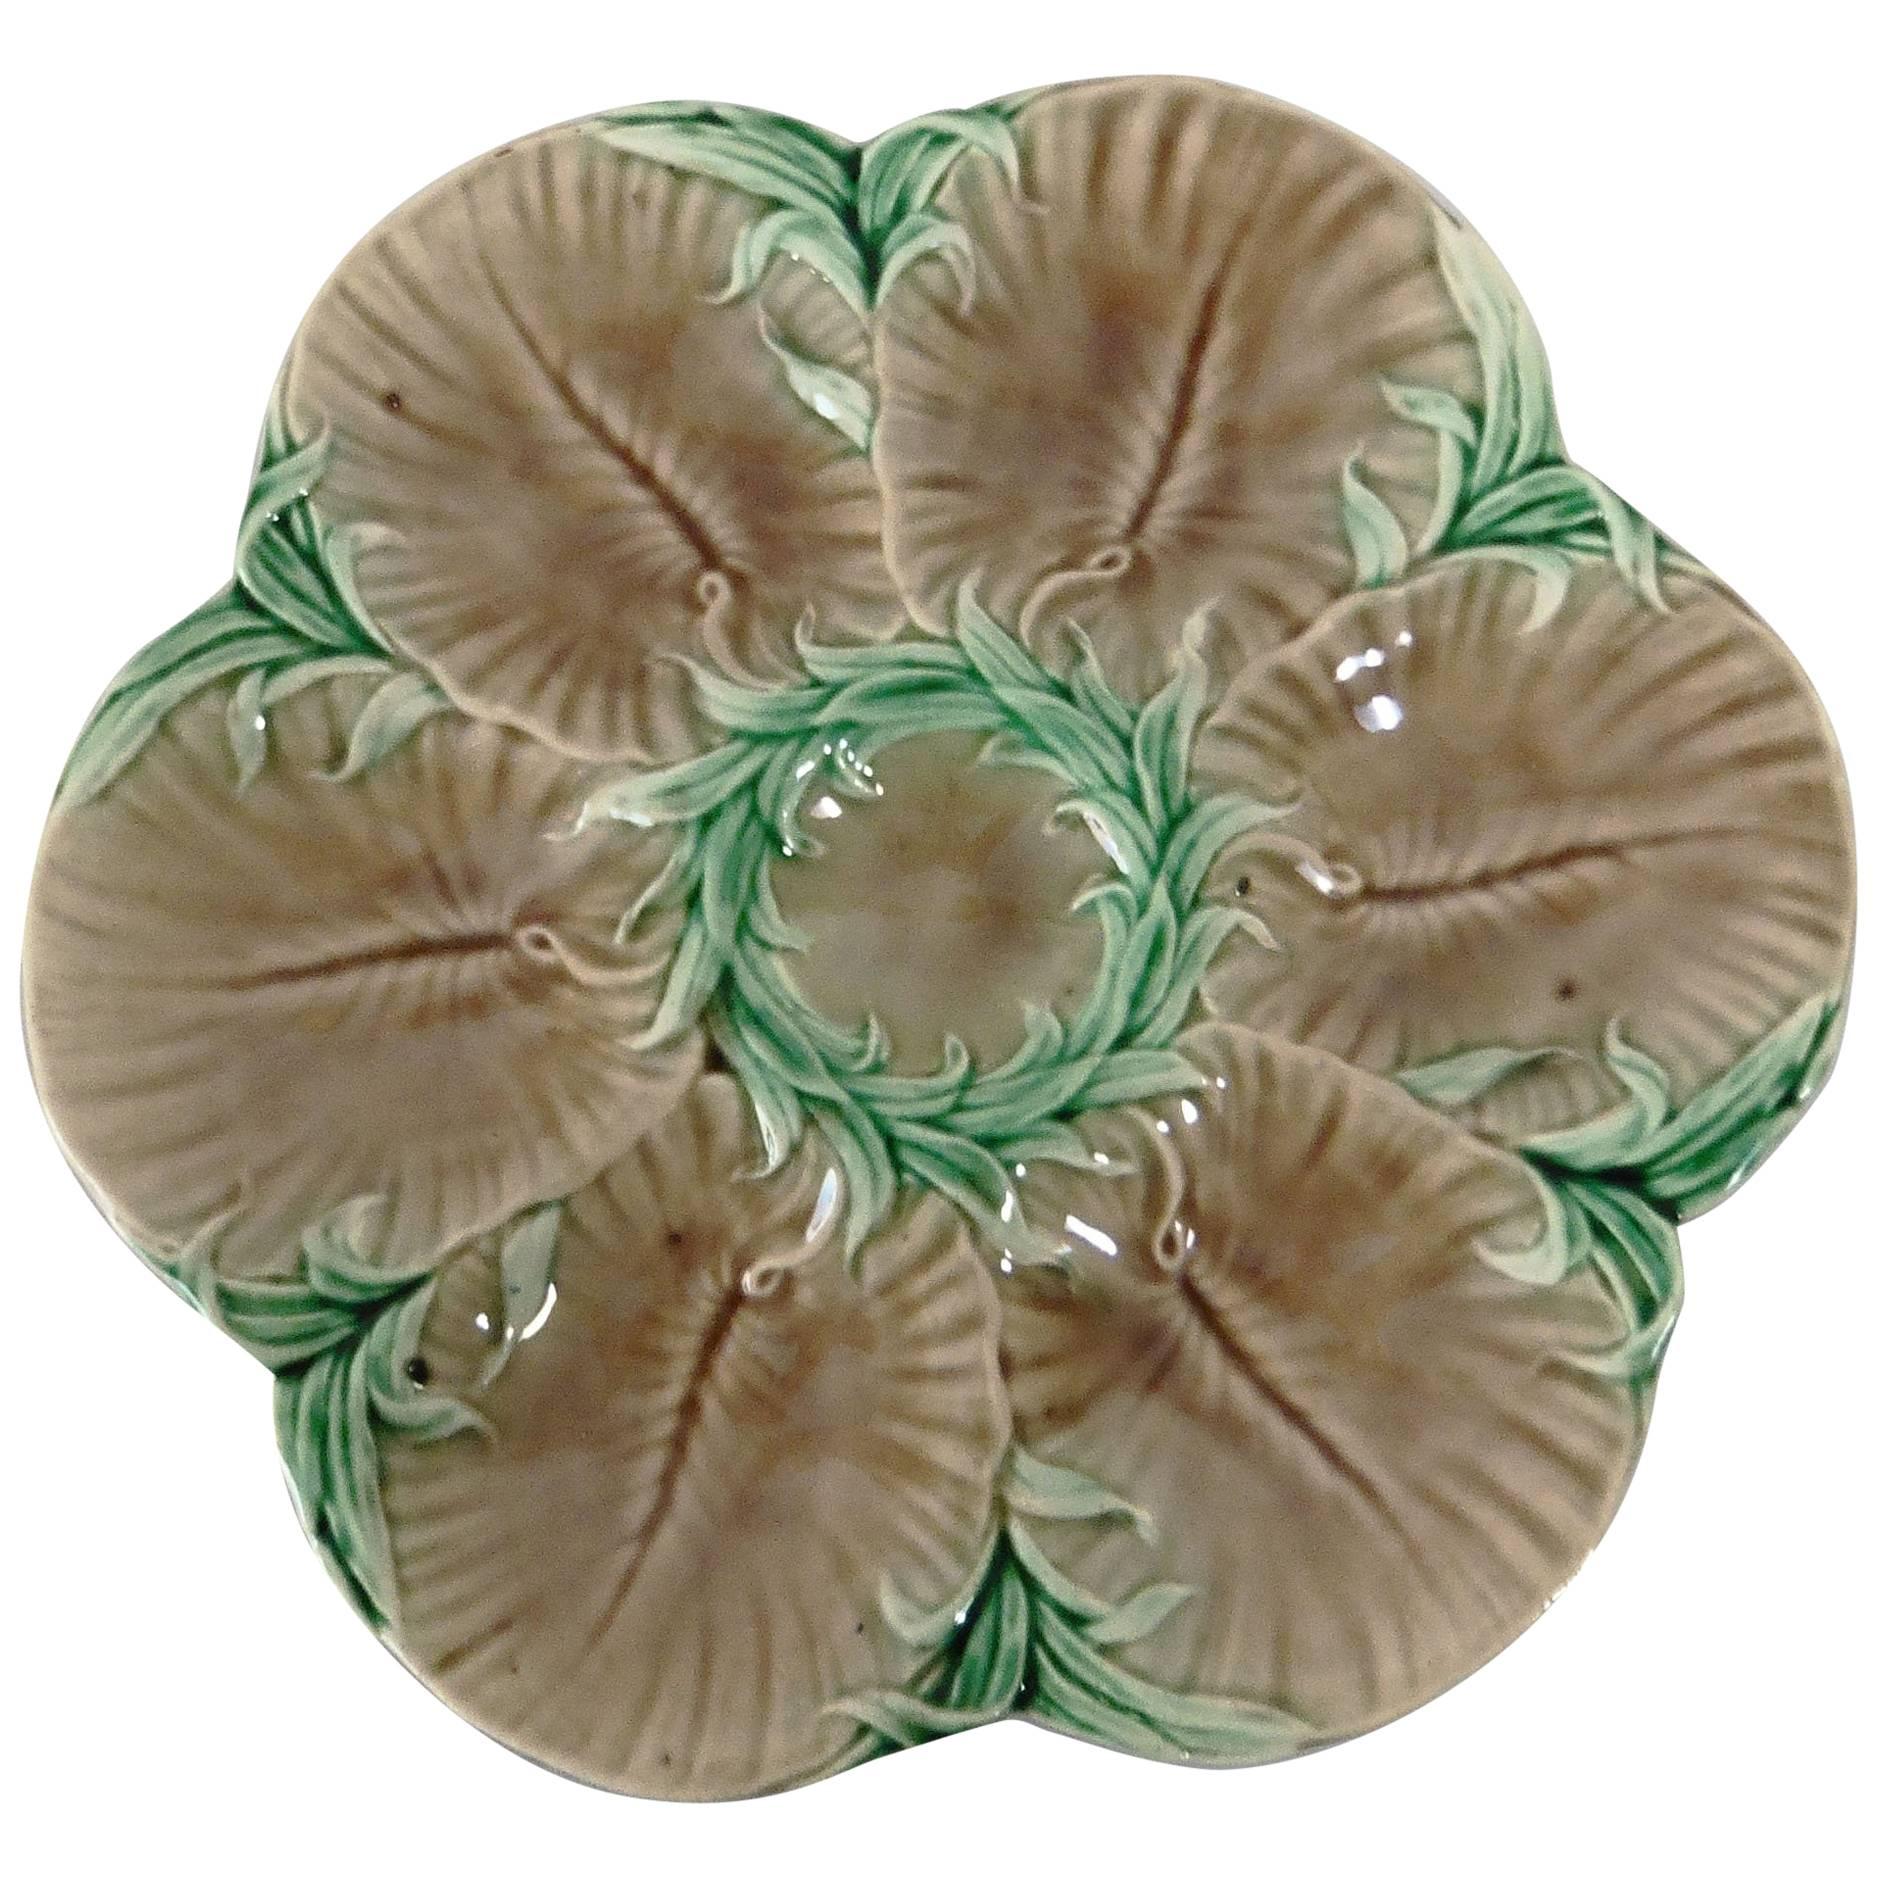 19th Century Majolica Chocolate Oyster Plate Luneville